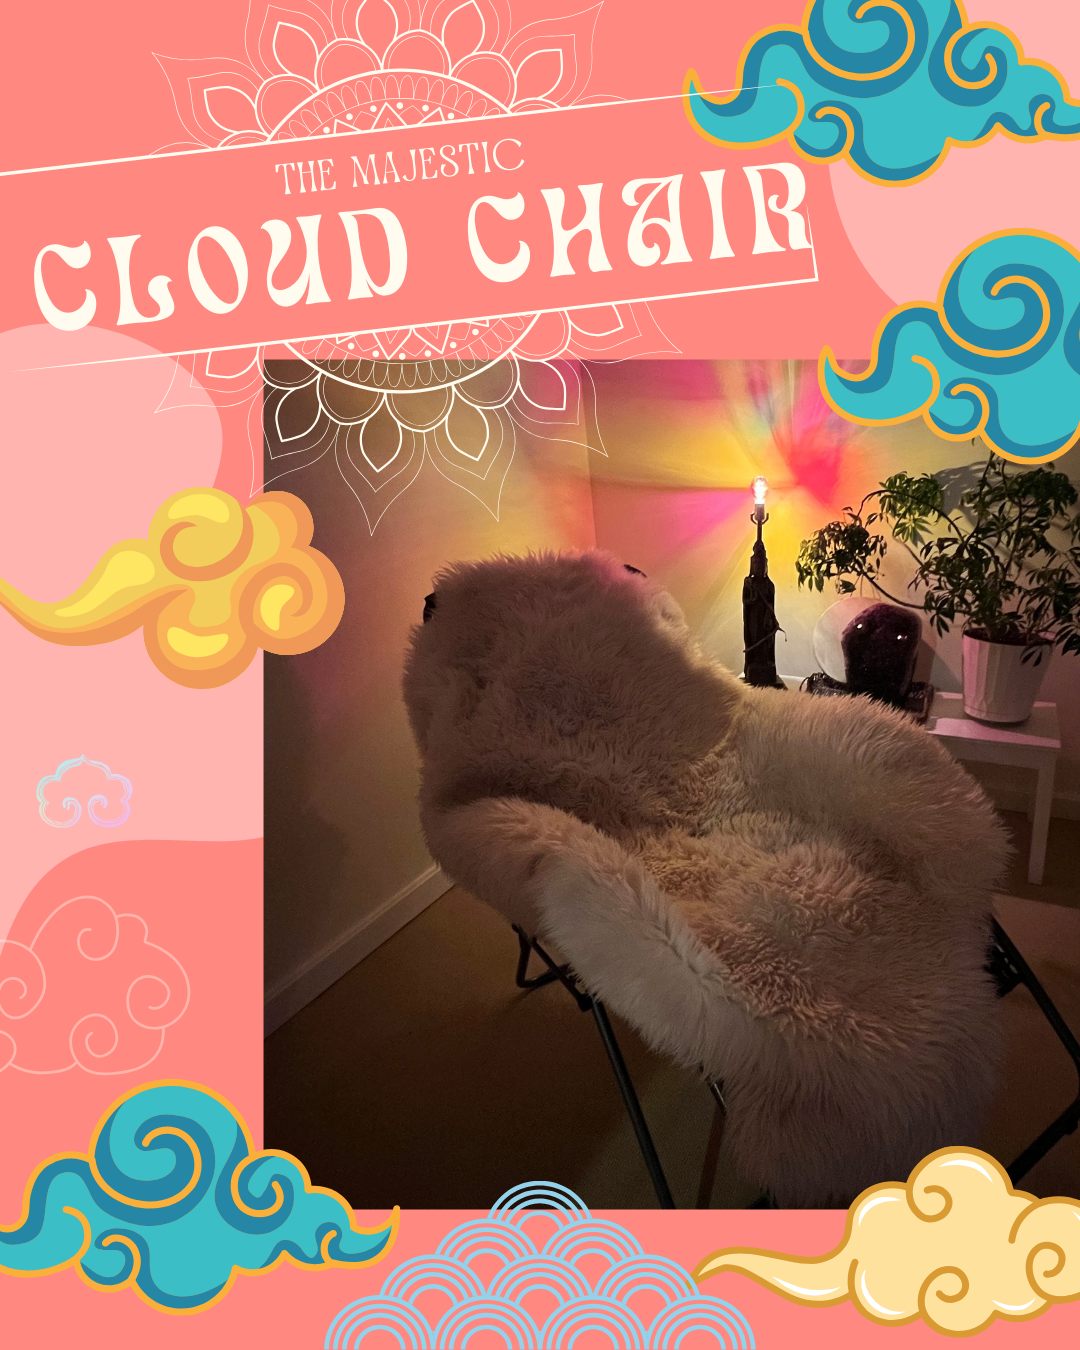 Majestic Cloud Chair Experience